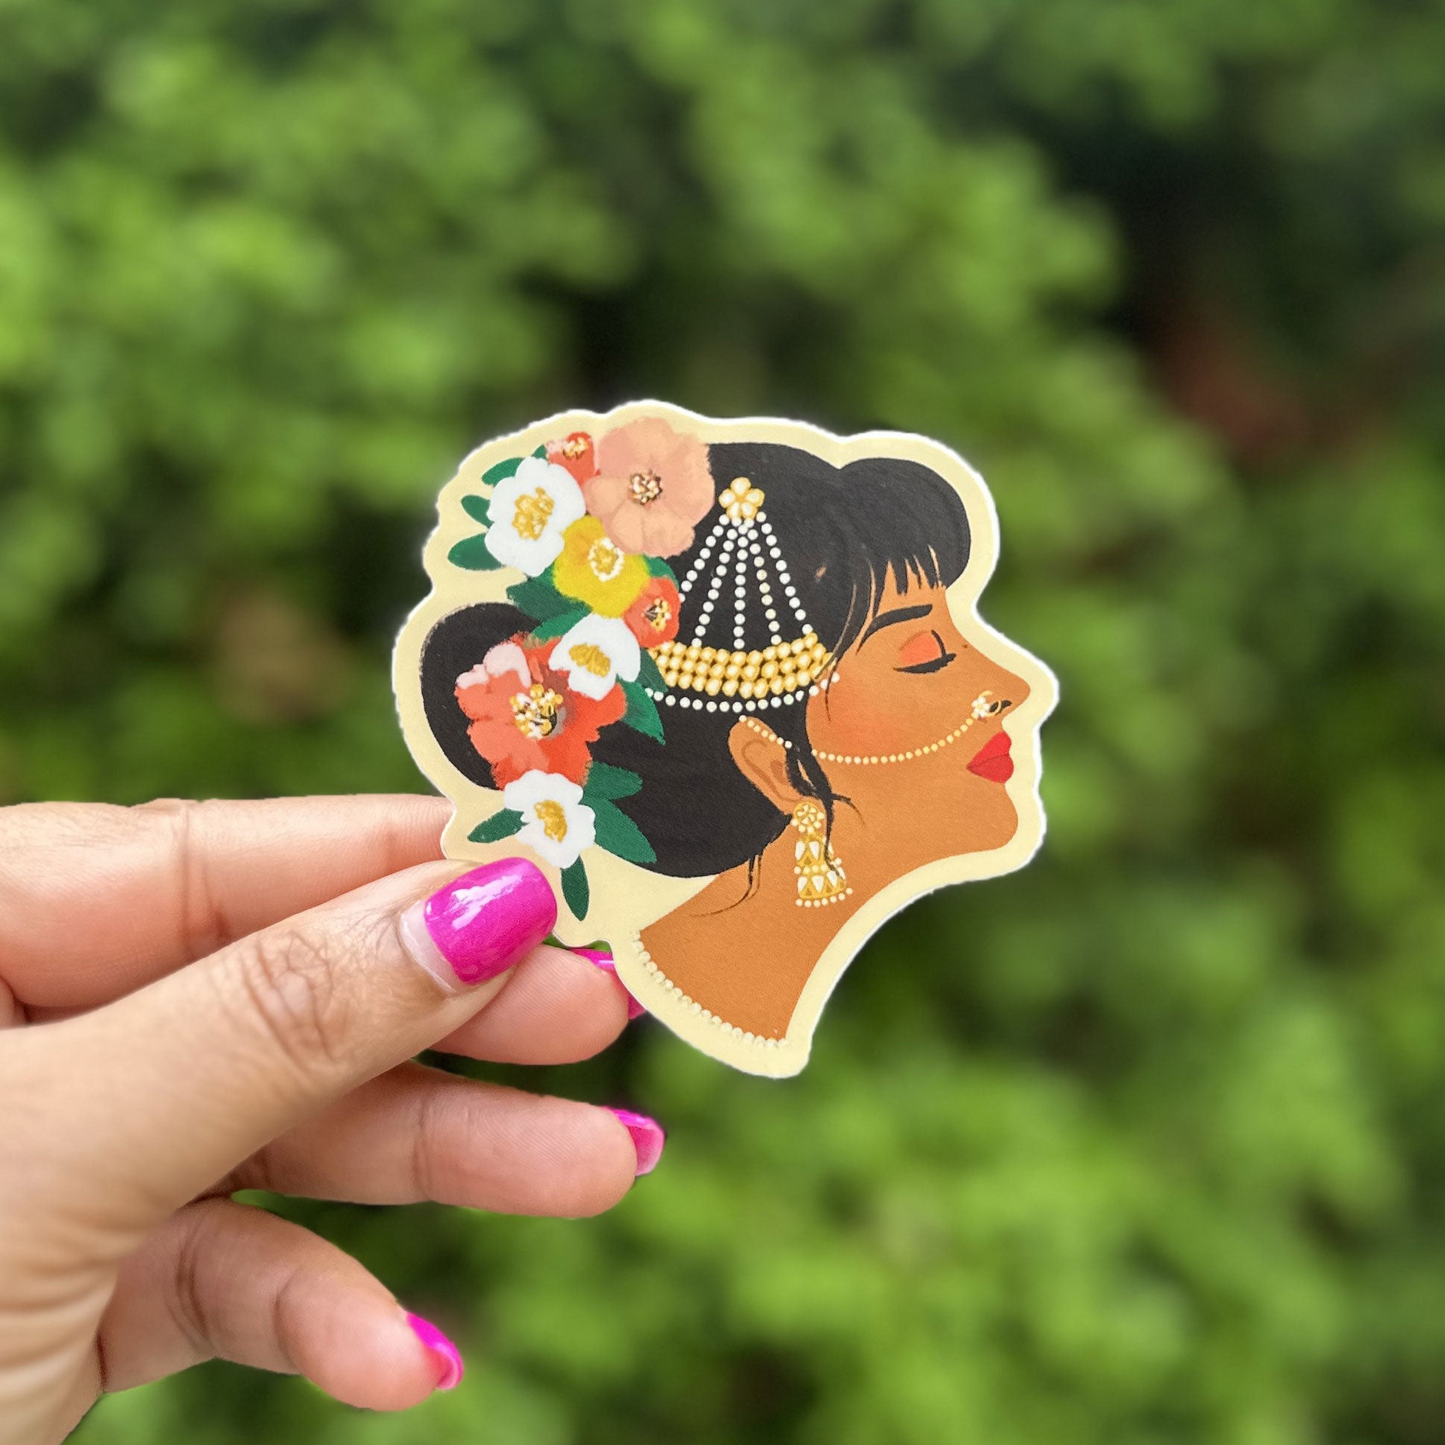 a hand holding a sticker of a woman's face